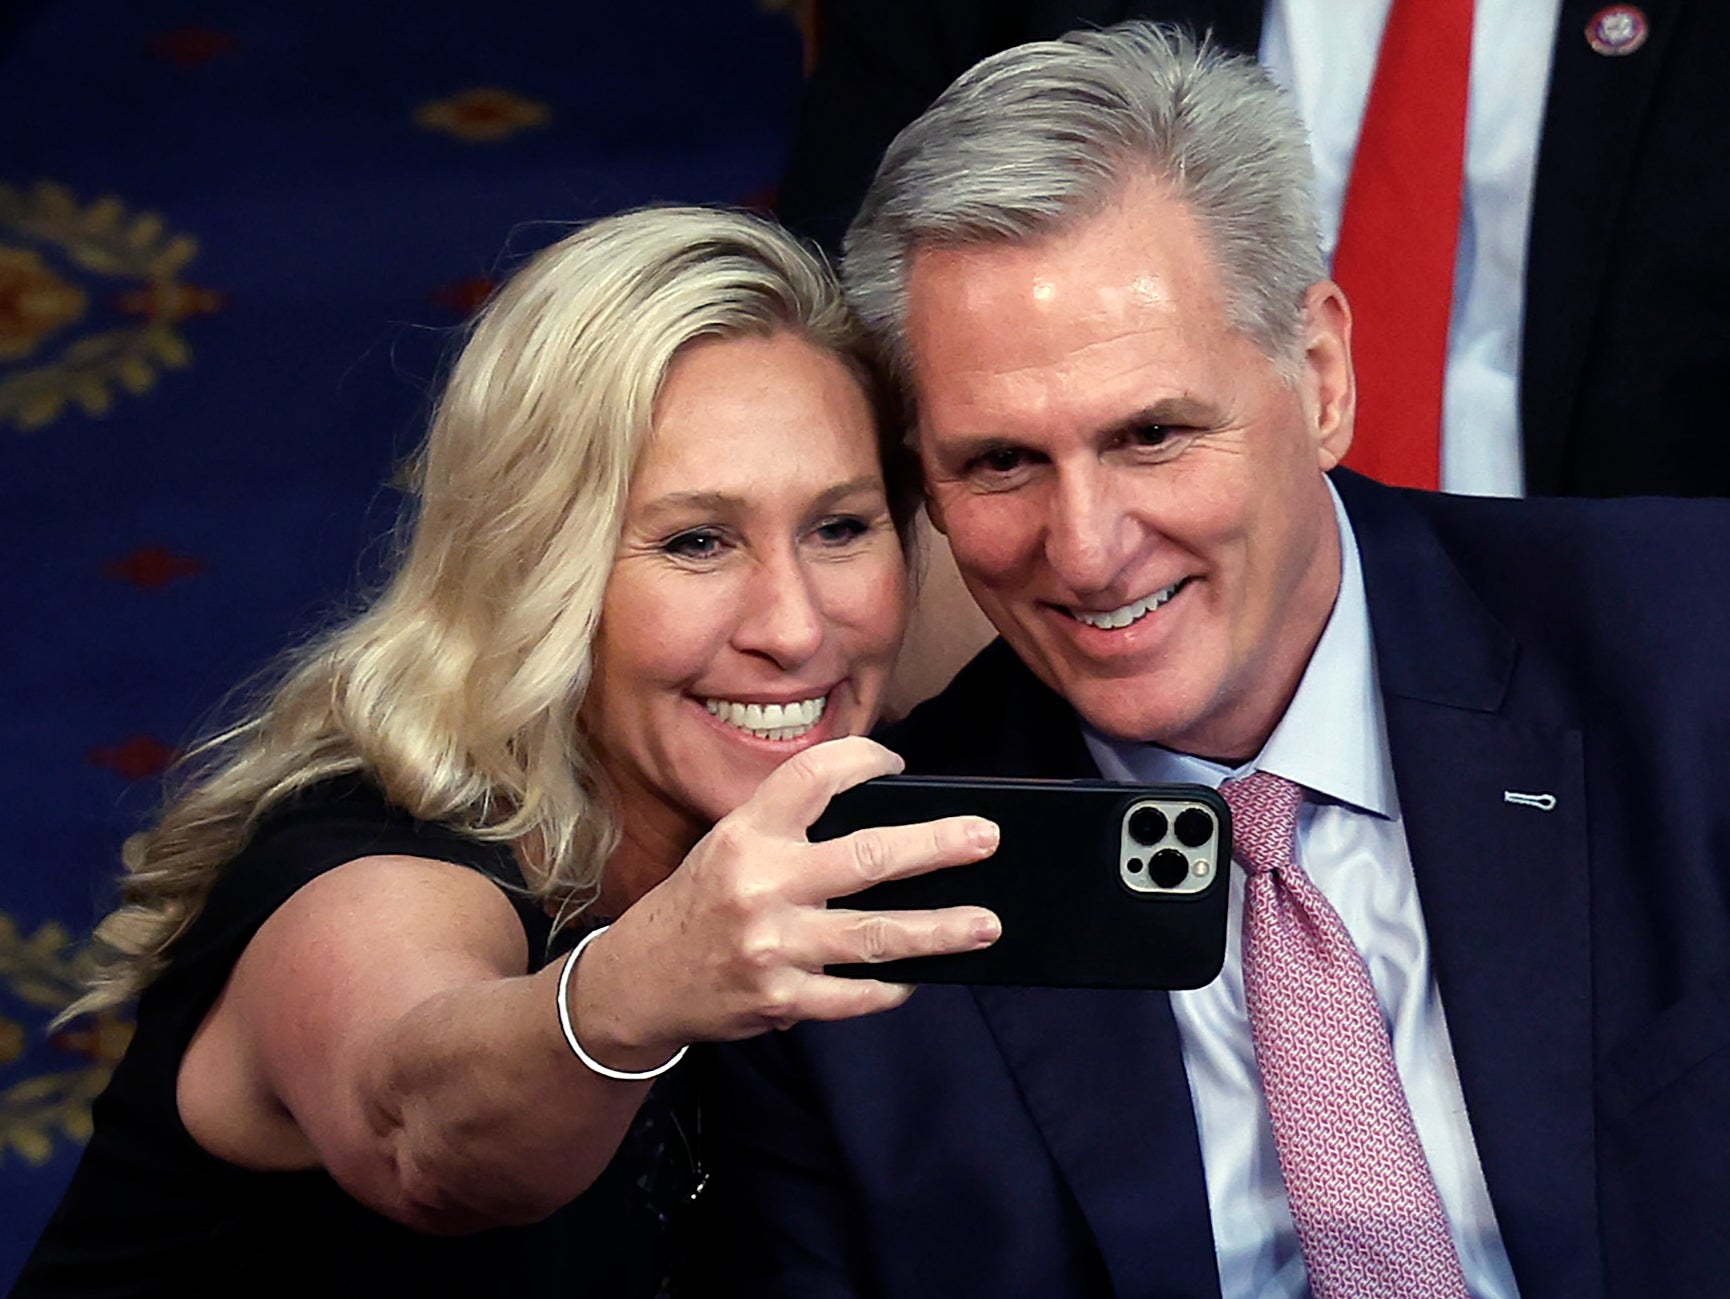 Marjorie Taylor Greene takes a photo with Kevin McCarthy after he was elected Speaker of the House in February